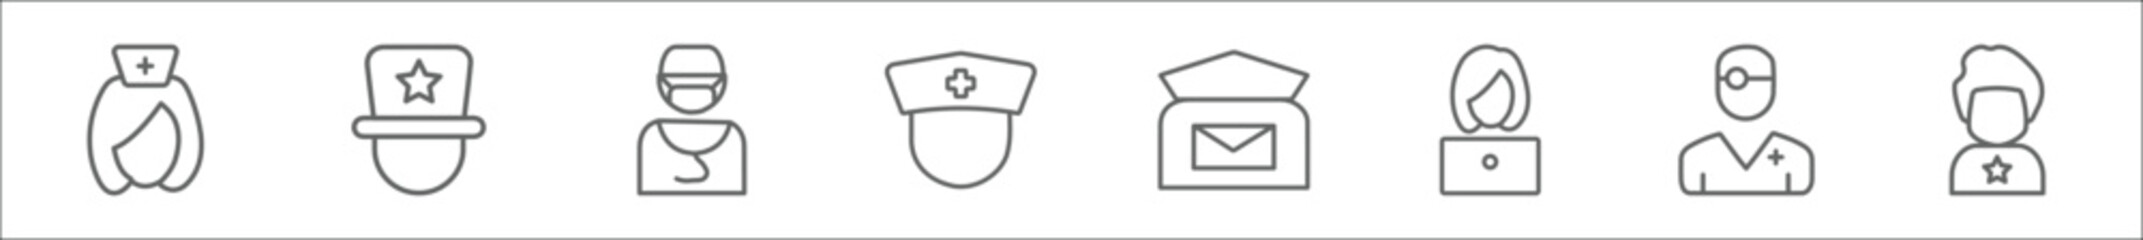 outline set of professions line icons. linear vector icons such as physician assistant, showman, surgeon, nurse, postman, secretary, doctor, superhero